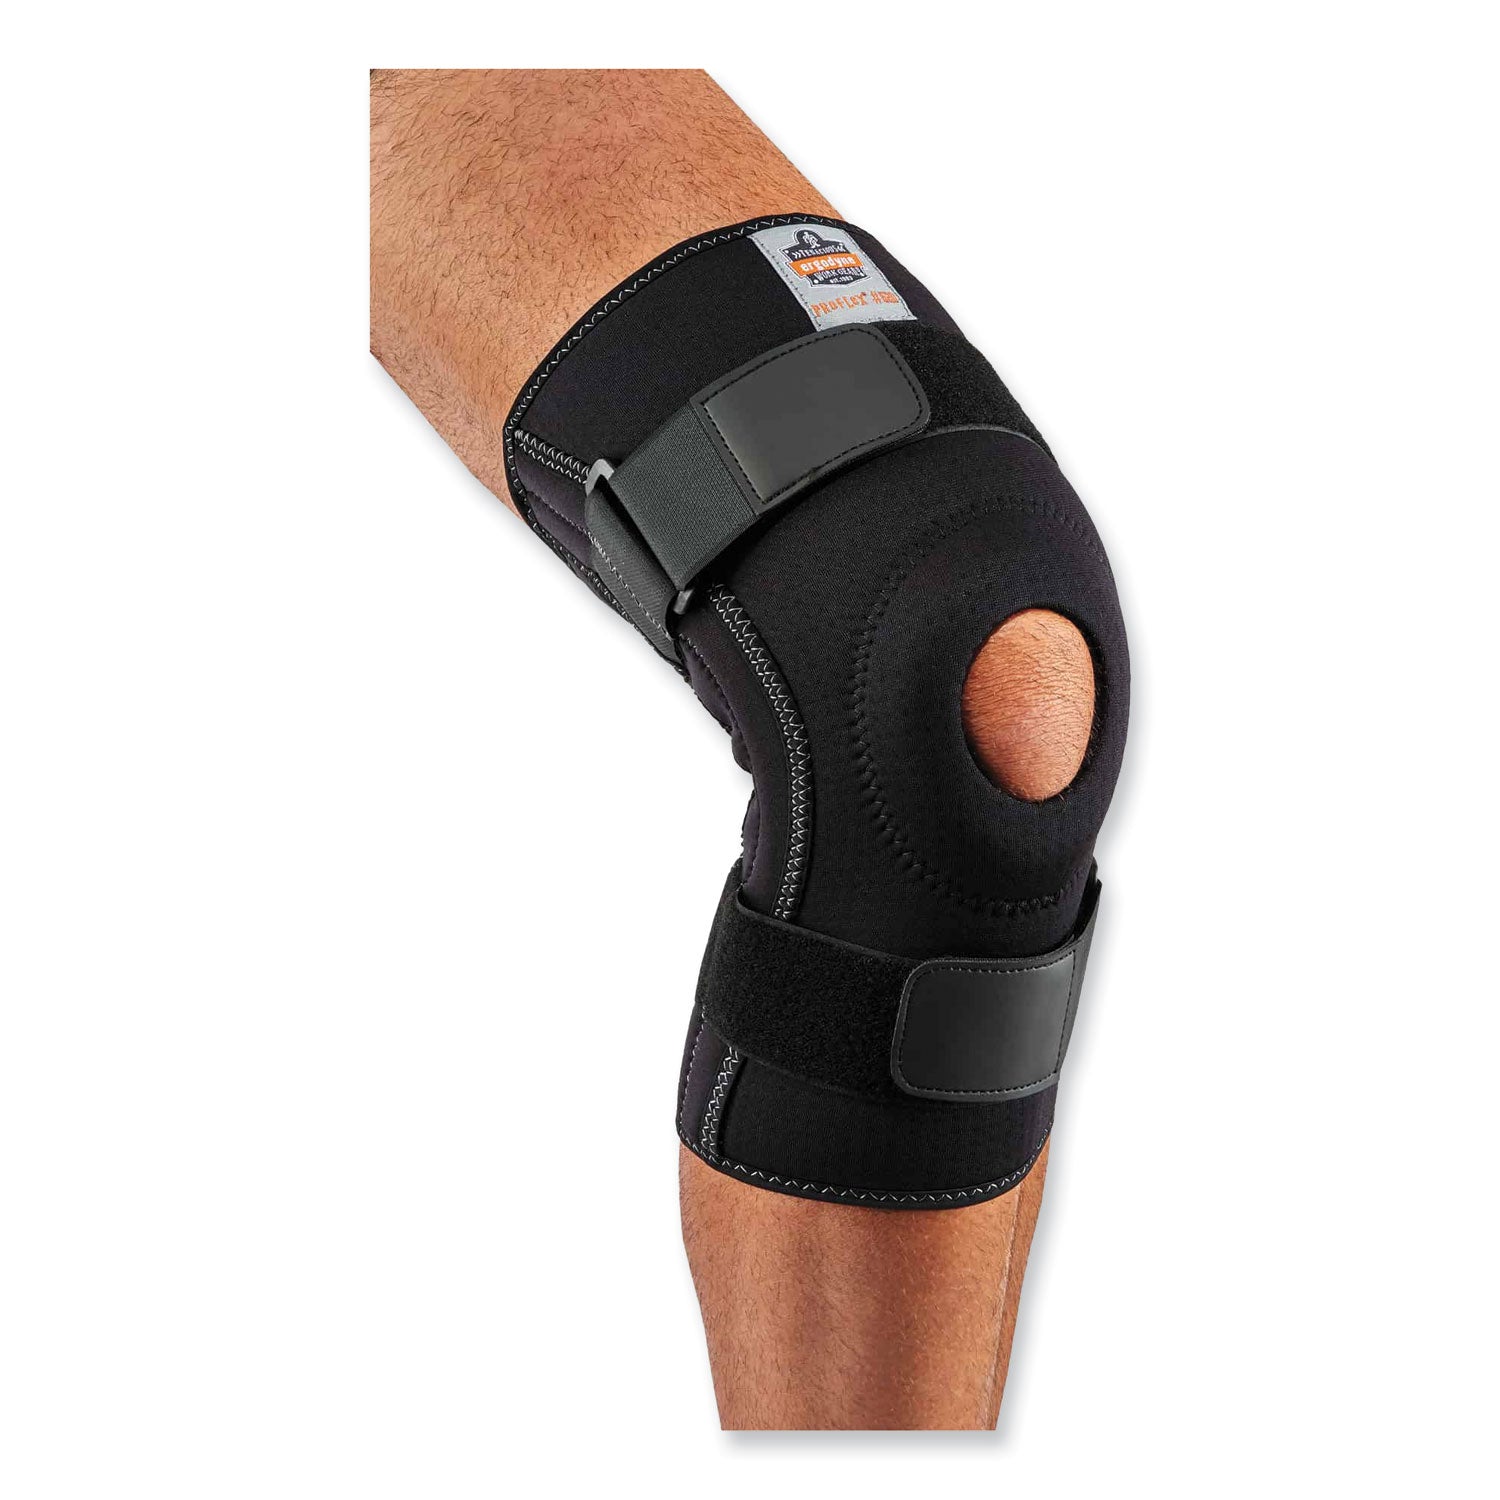 proflex-620-open-patella-spiral-stays-knee-sleeve-large-black-ships-in-1-3-business-days_ego16544 - 2